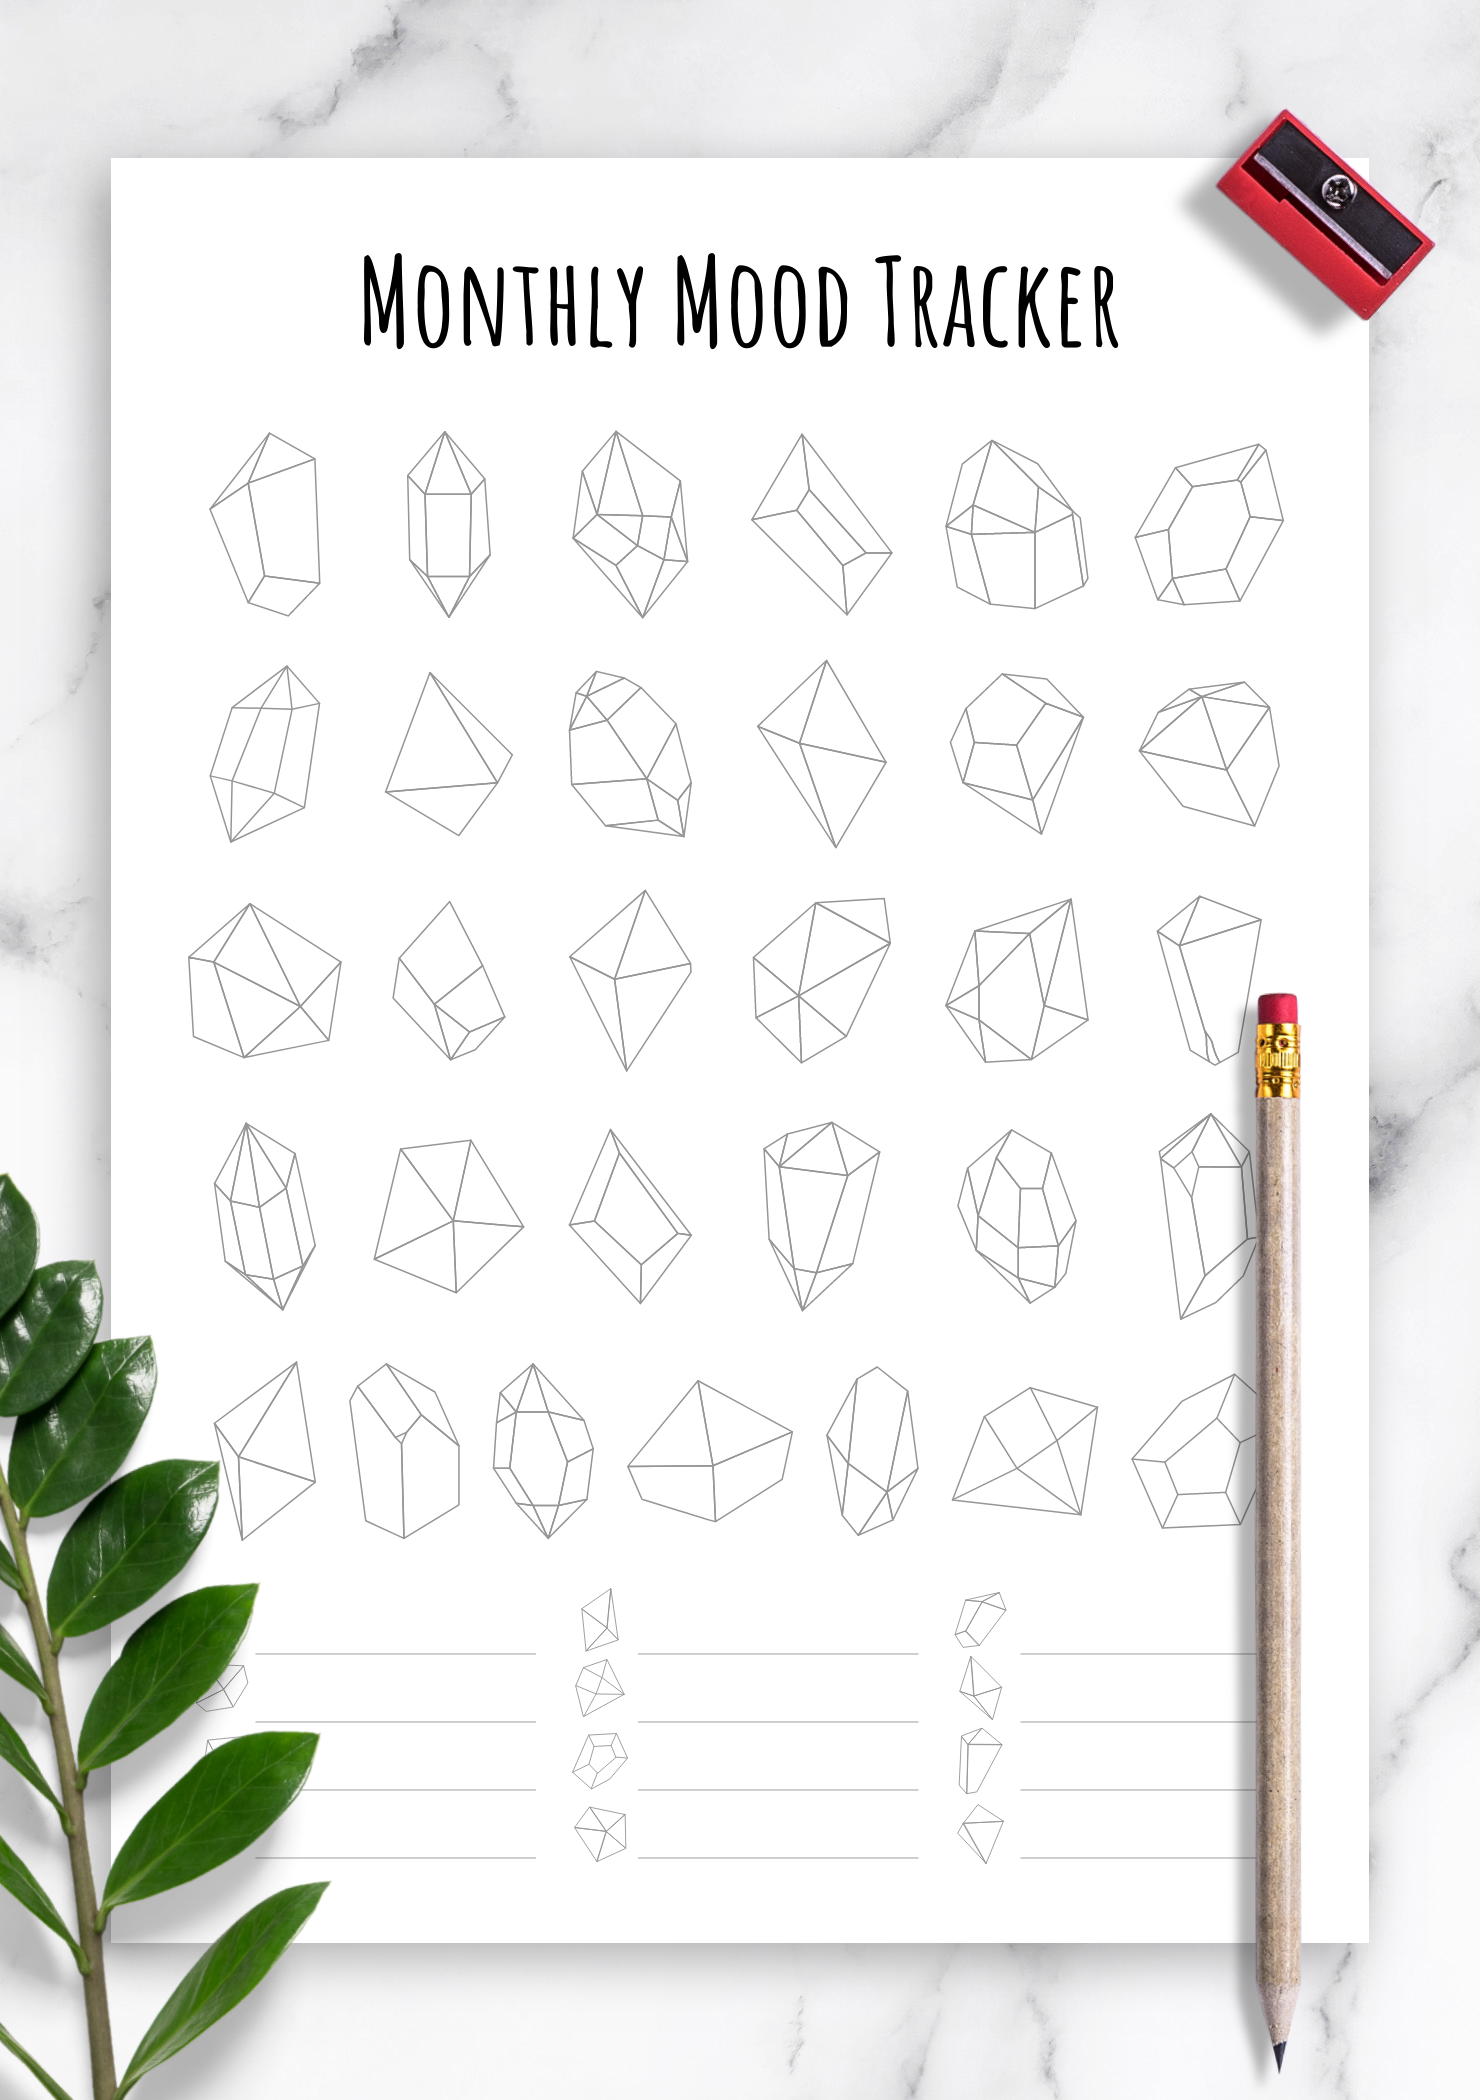 paper-party-supplies-calendars-planners-monthly-mood-tracker